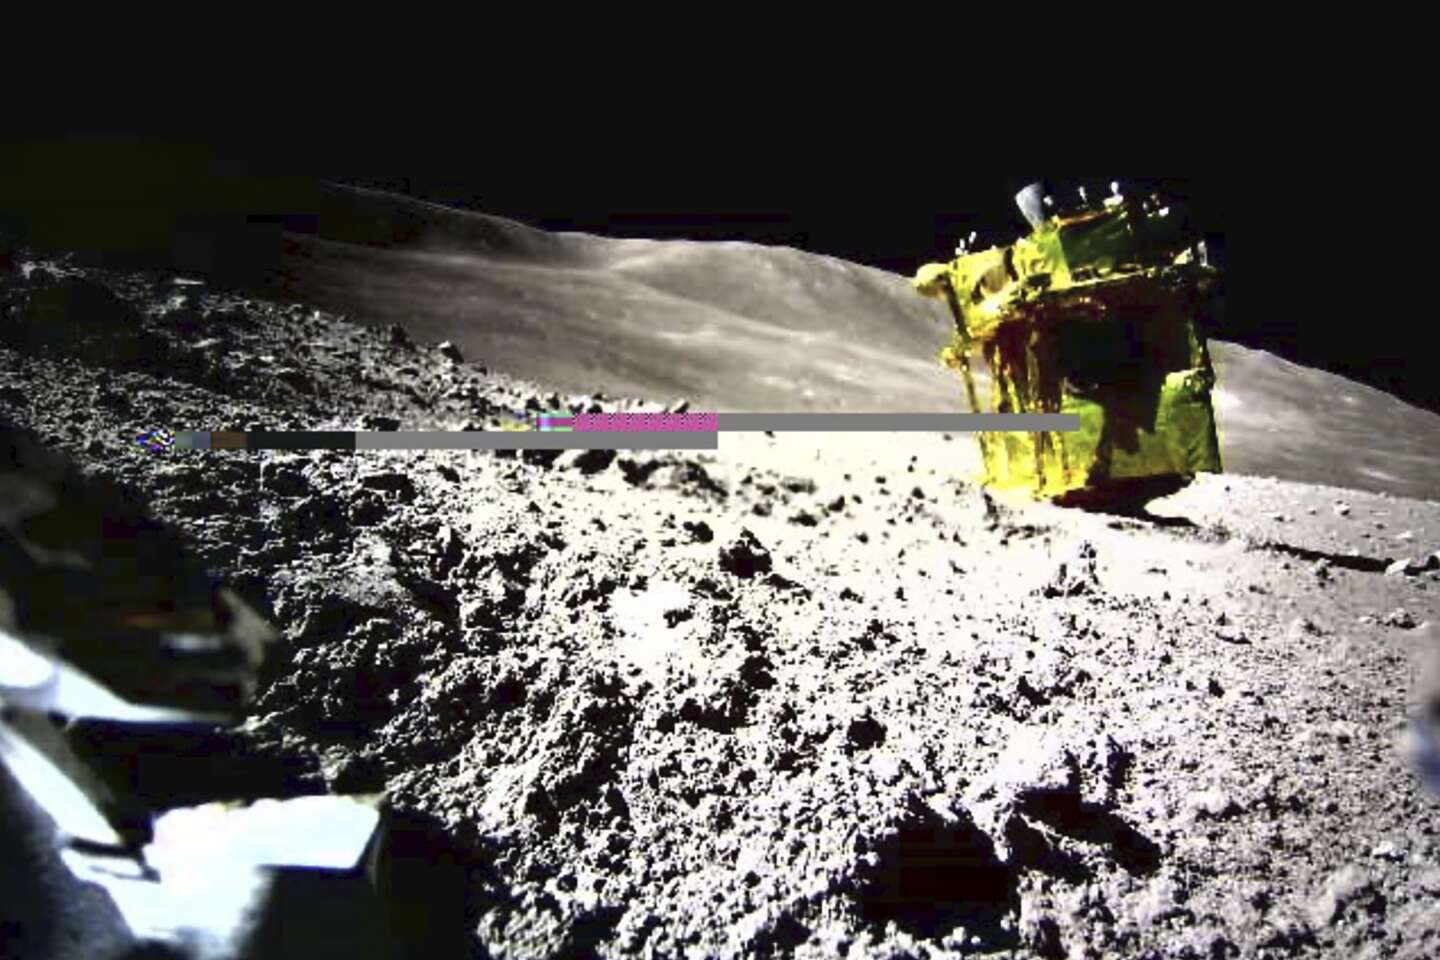 Japanese moon lander revives and communicates with base